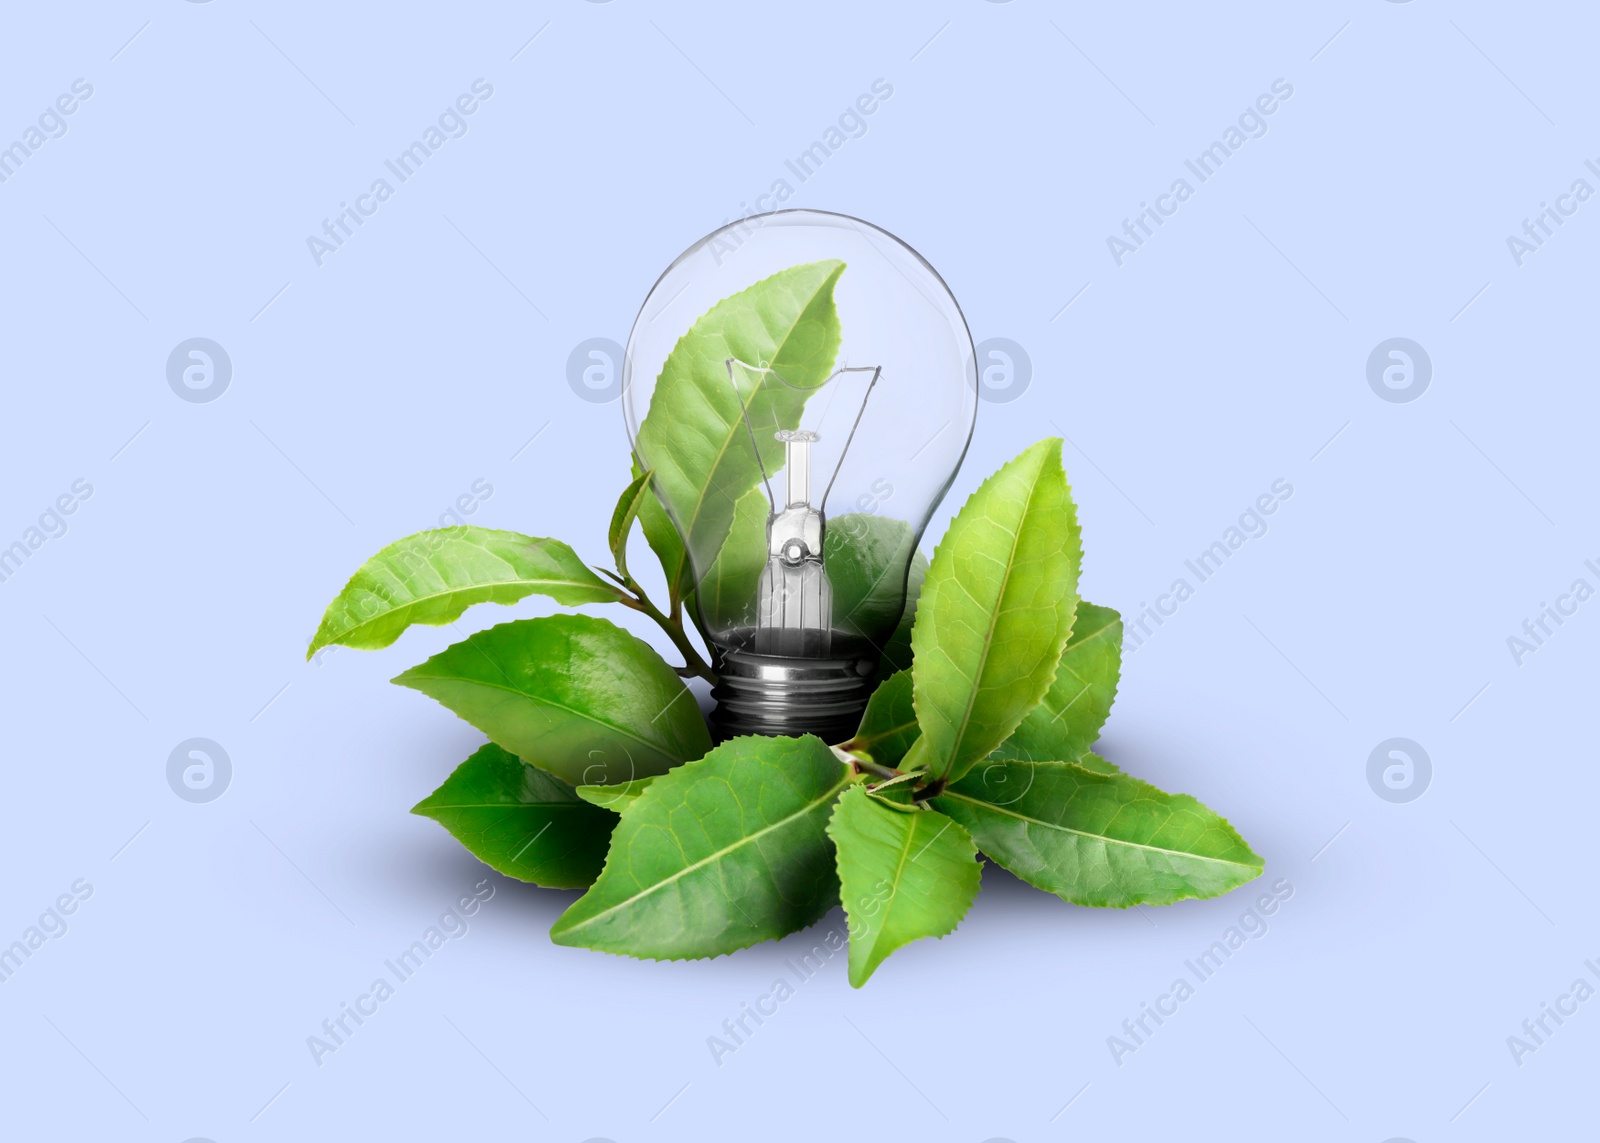 Image of Saving energy, eco-friendly lifestyle. Light bulb and fresh green leaves on light blue background